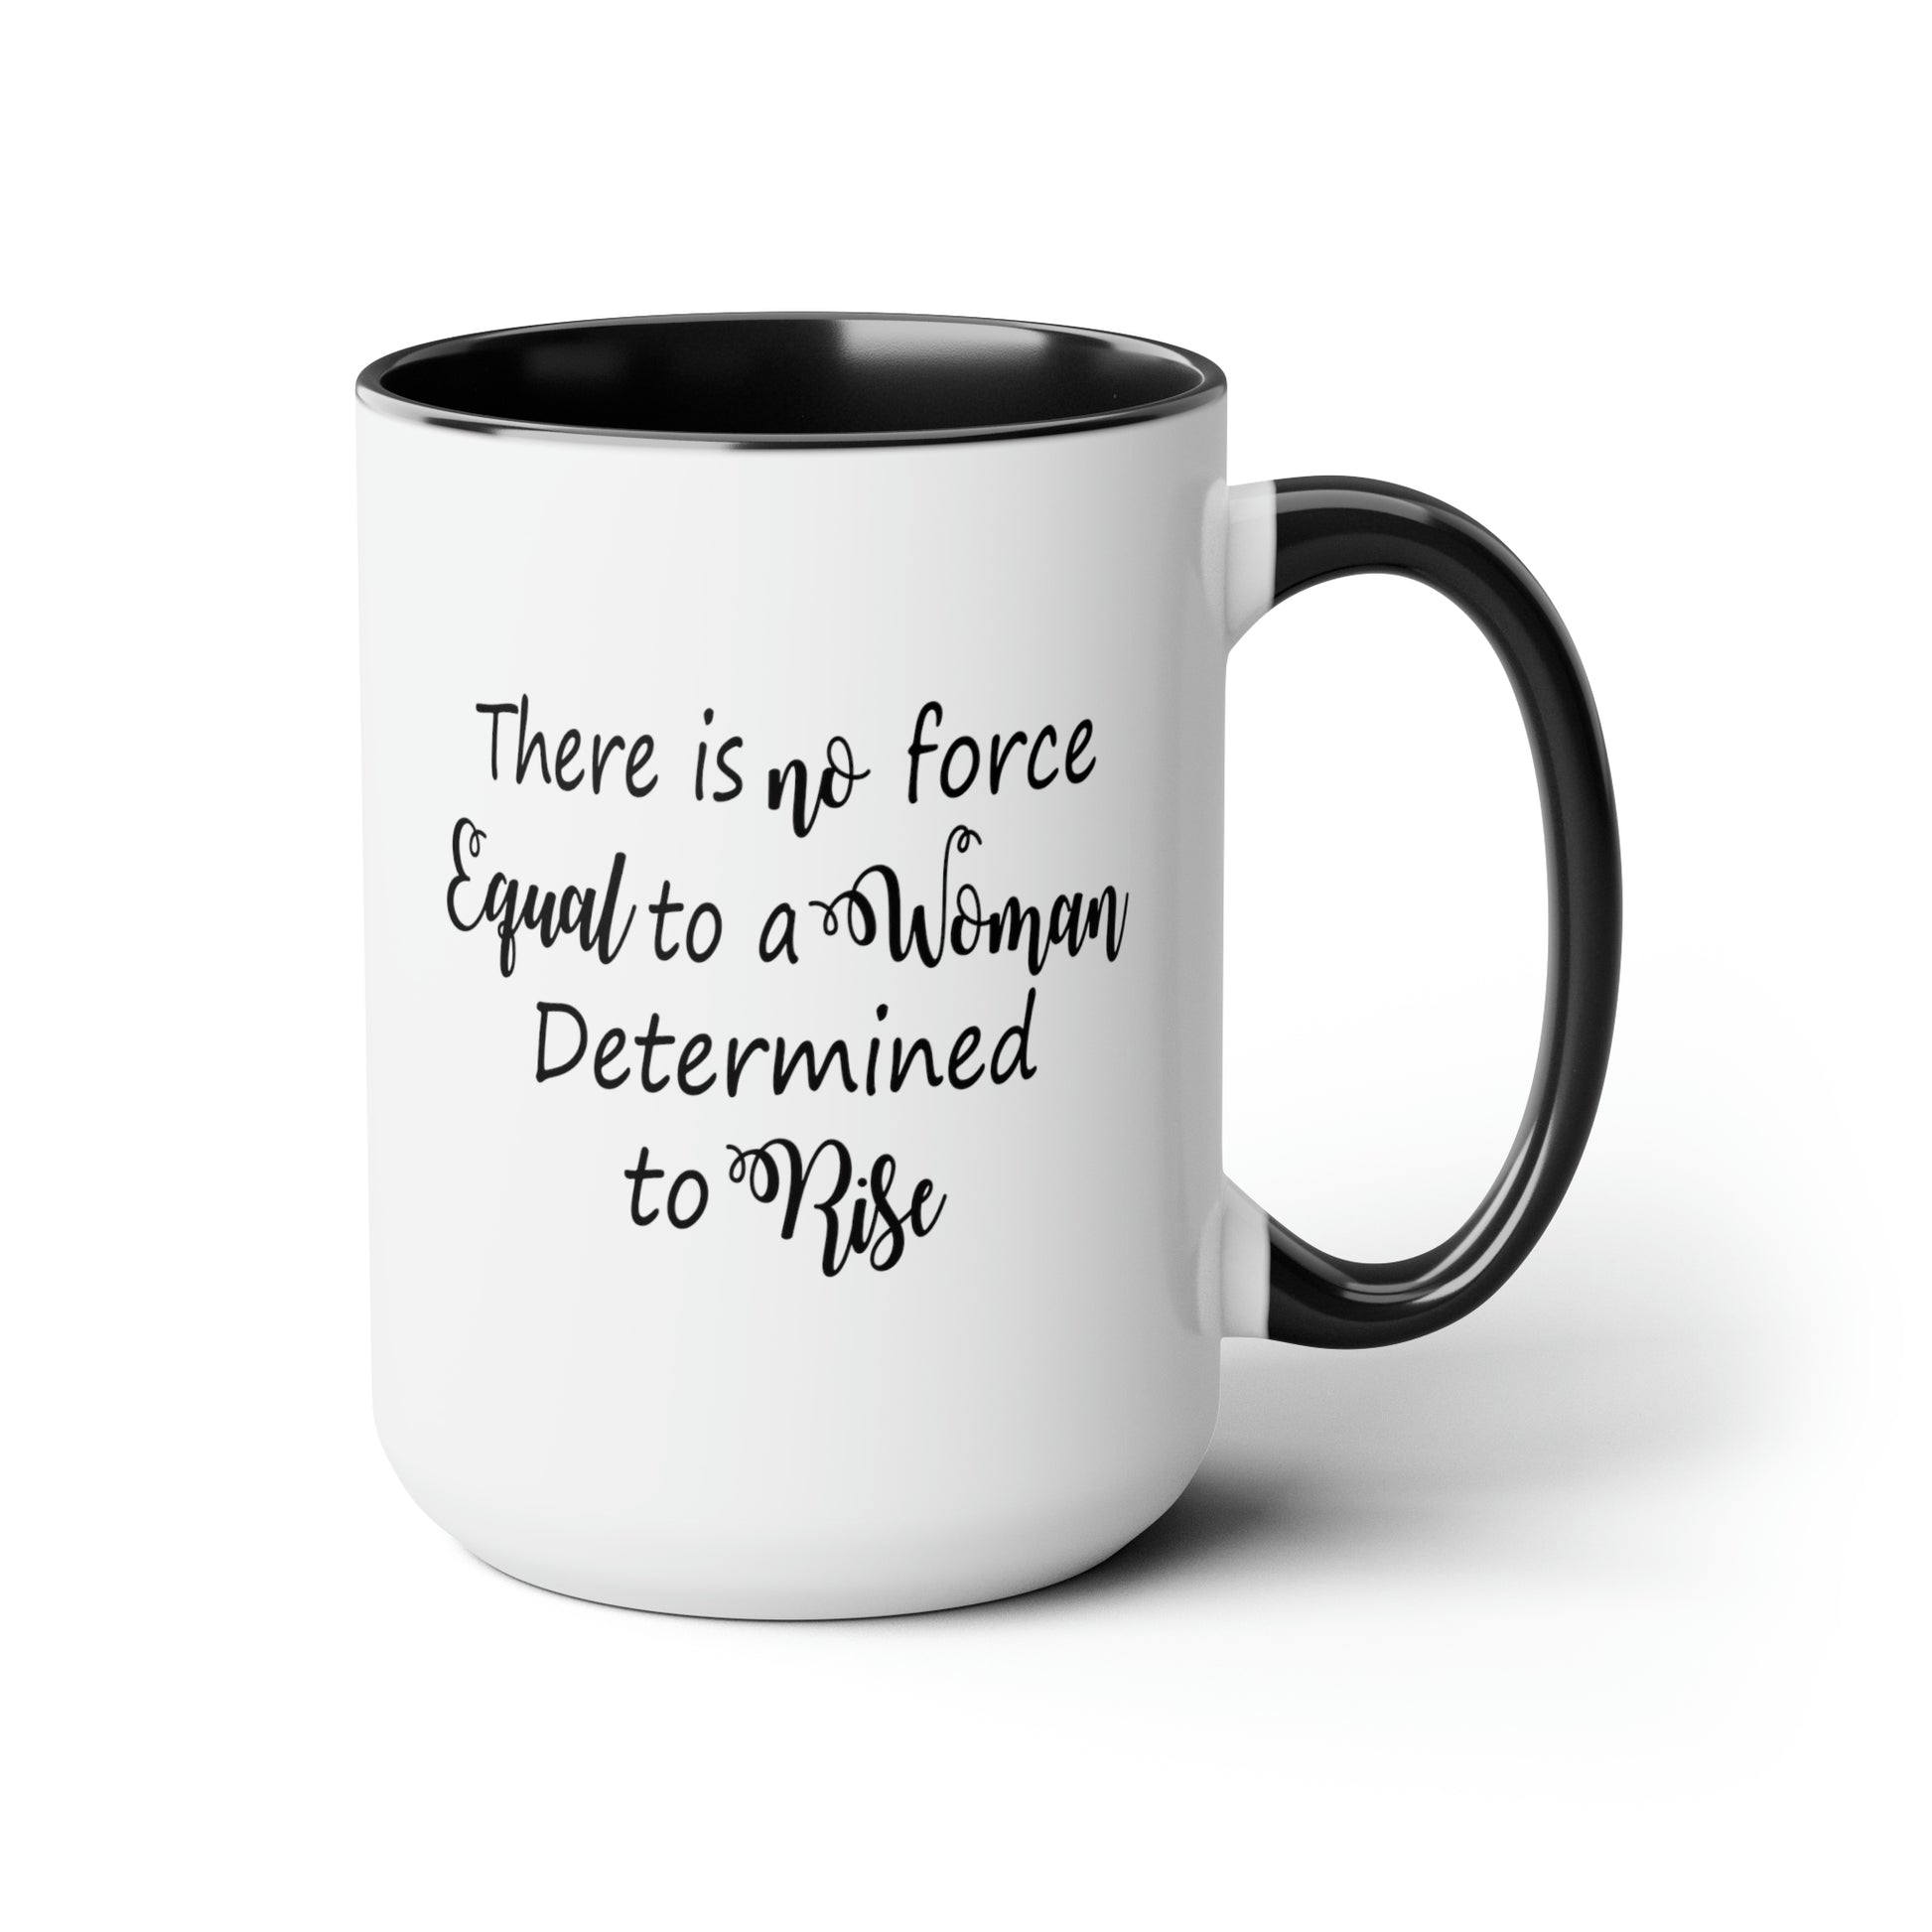 Determined Woman Coffee Mug - Double Sided Black Accent White Ceramic 15oz by TheGlassyLass.com